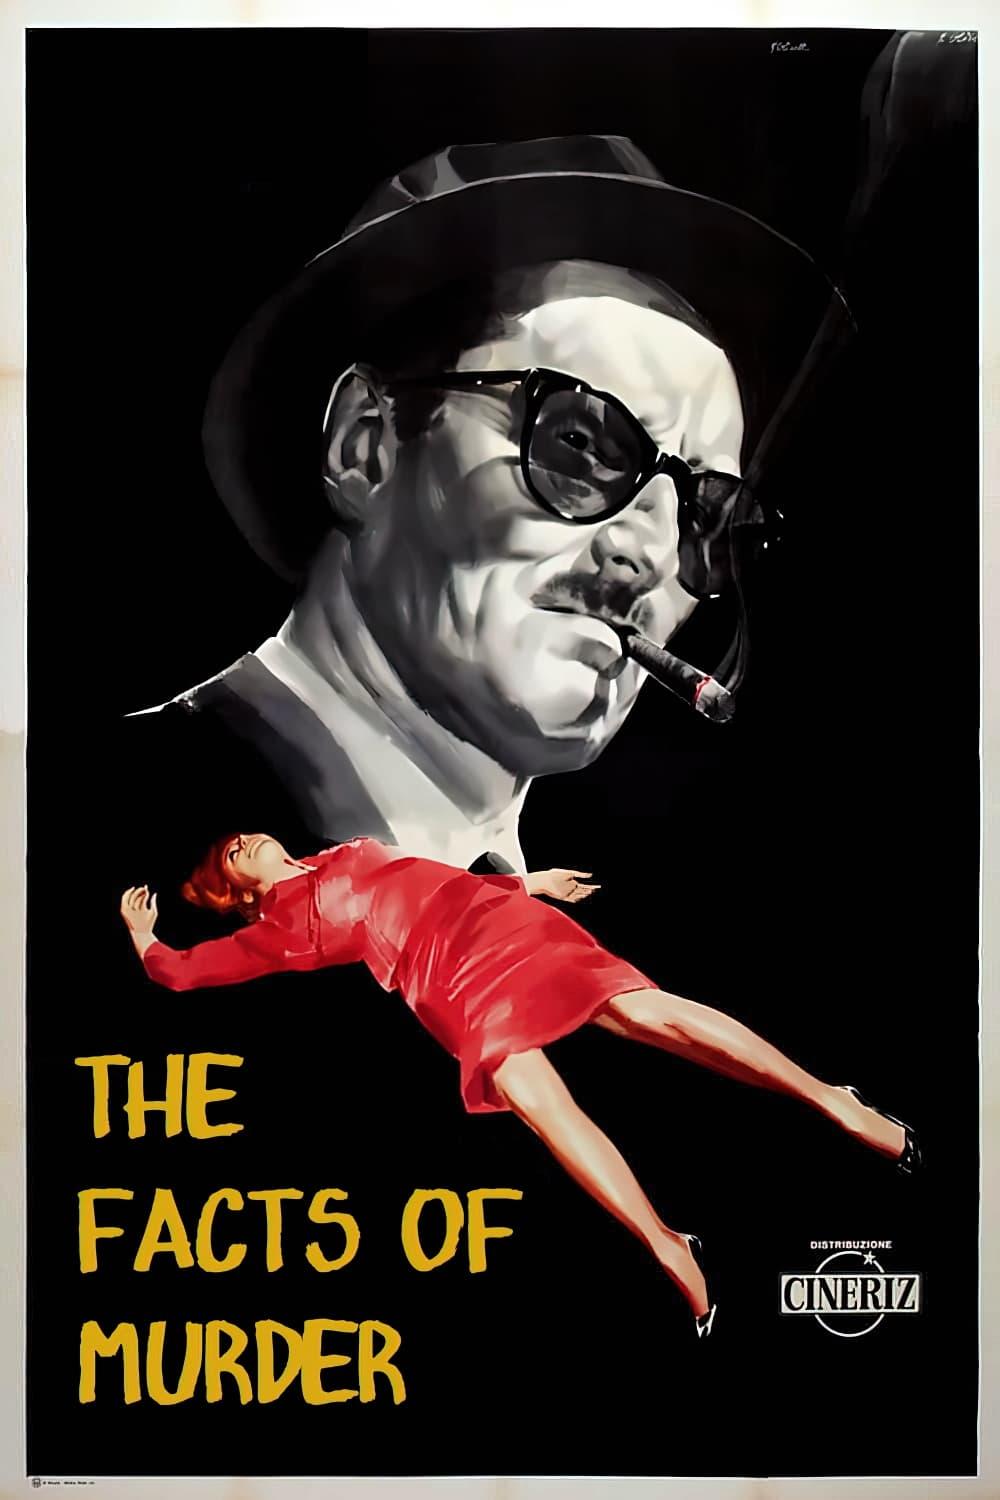 The Facts of Murder poster